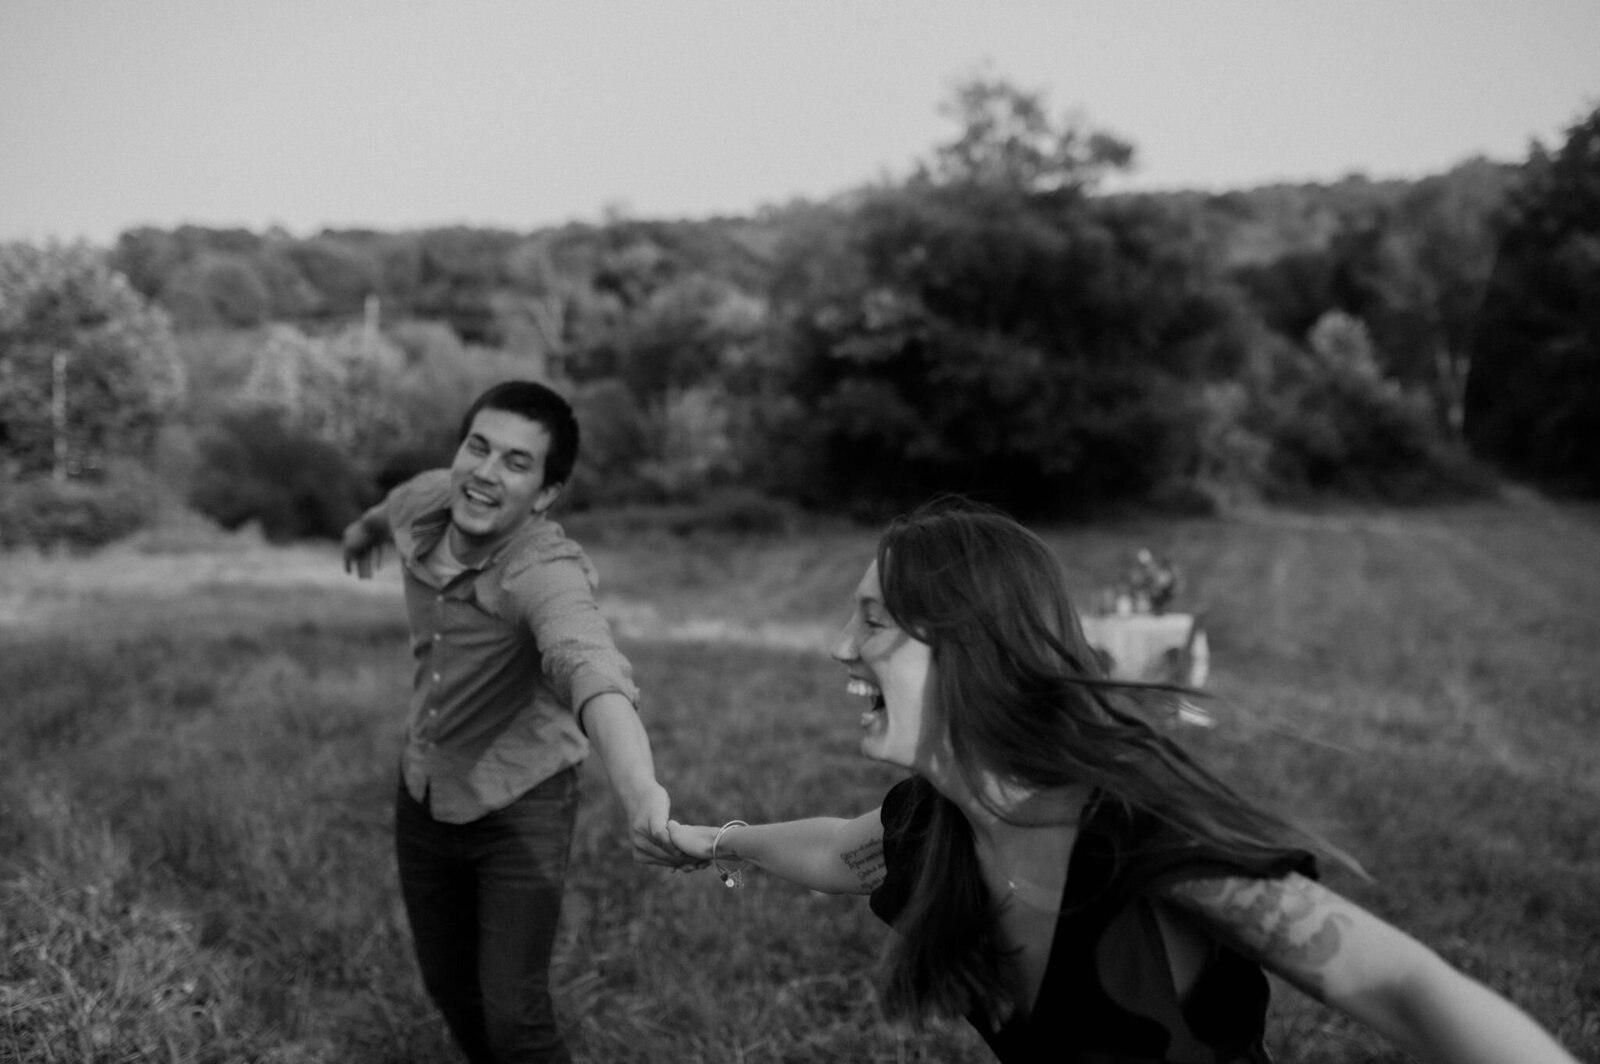 couple holding hands playfully running through field laughing and twirling